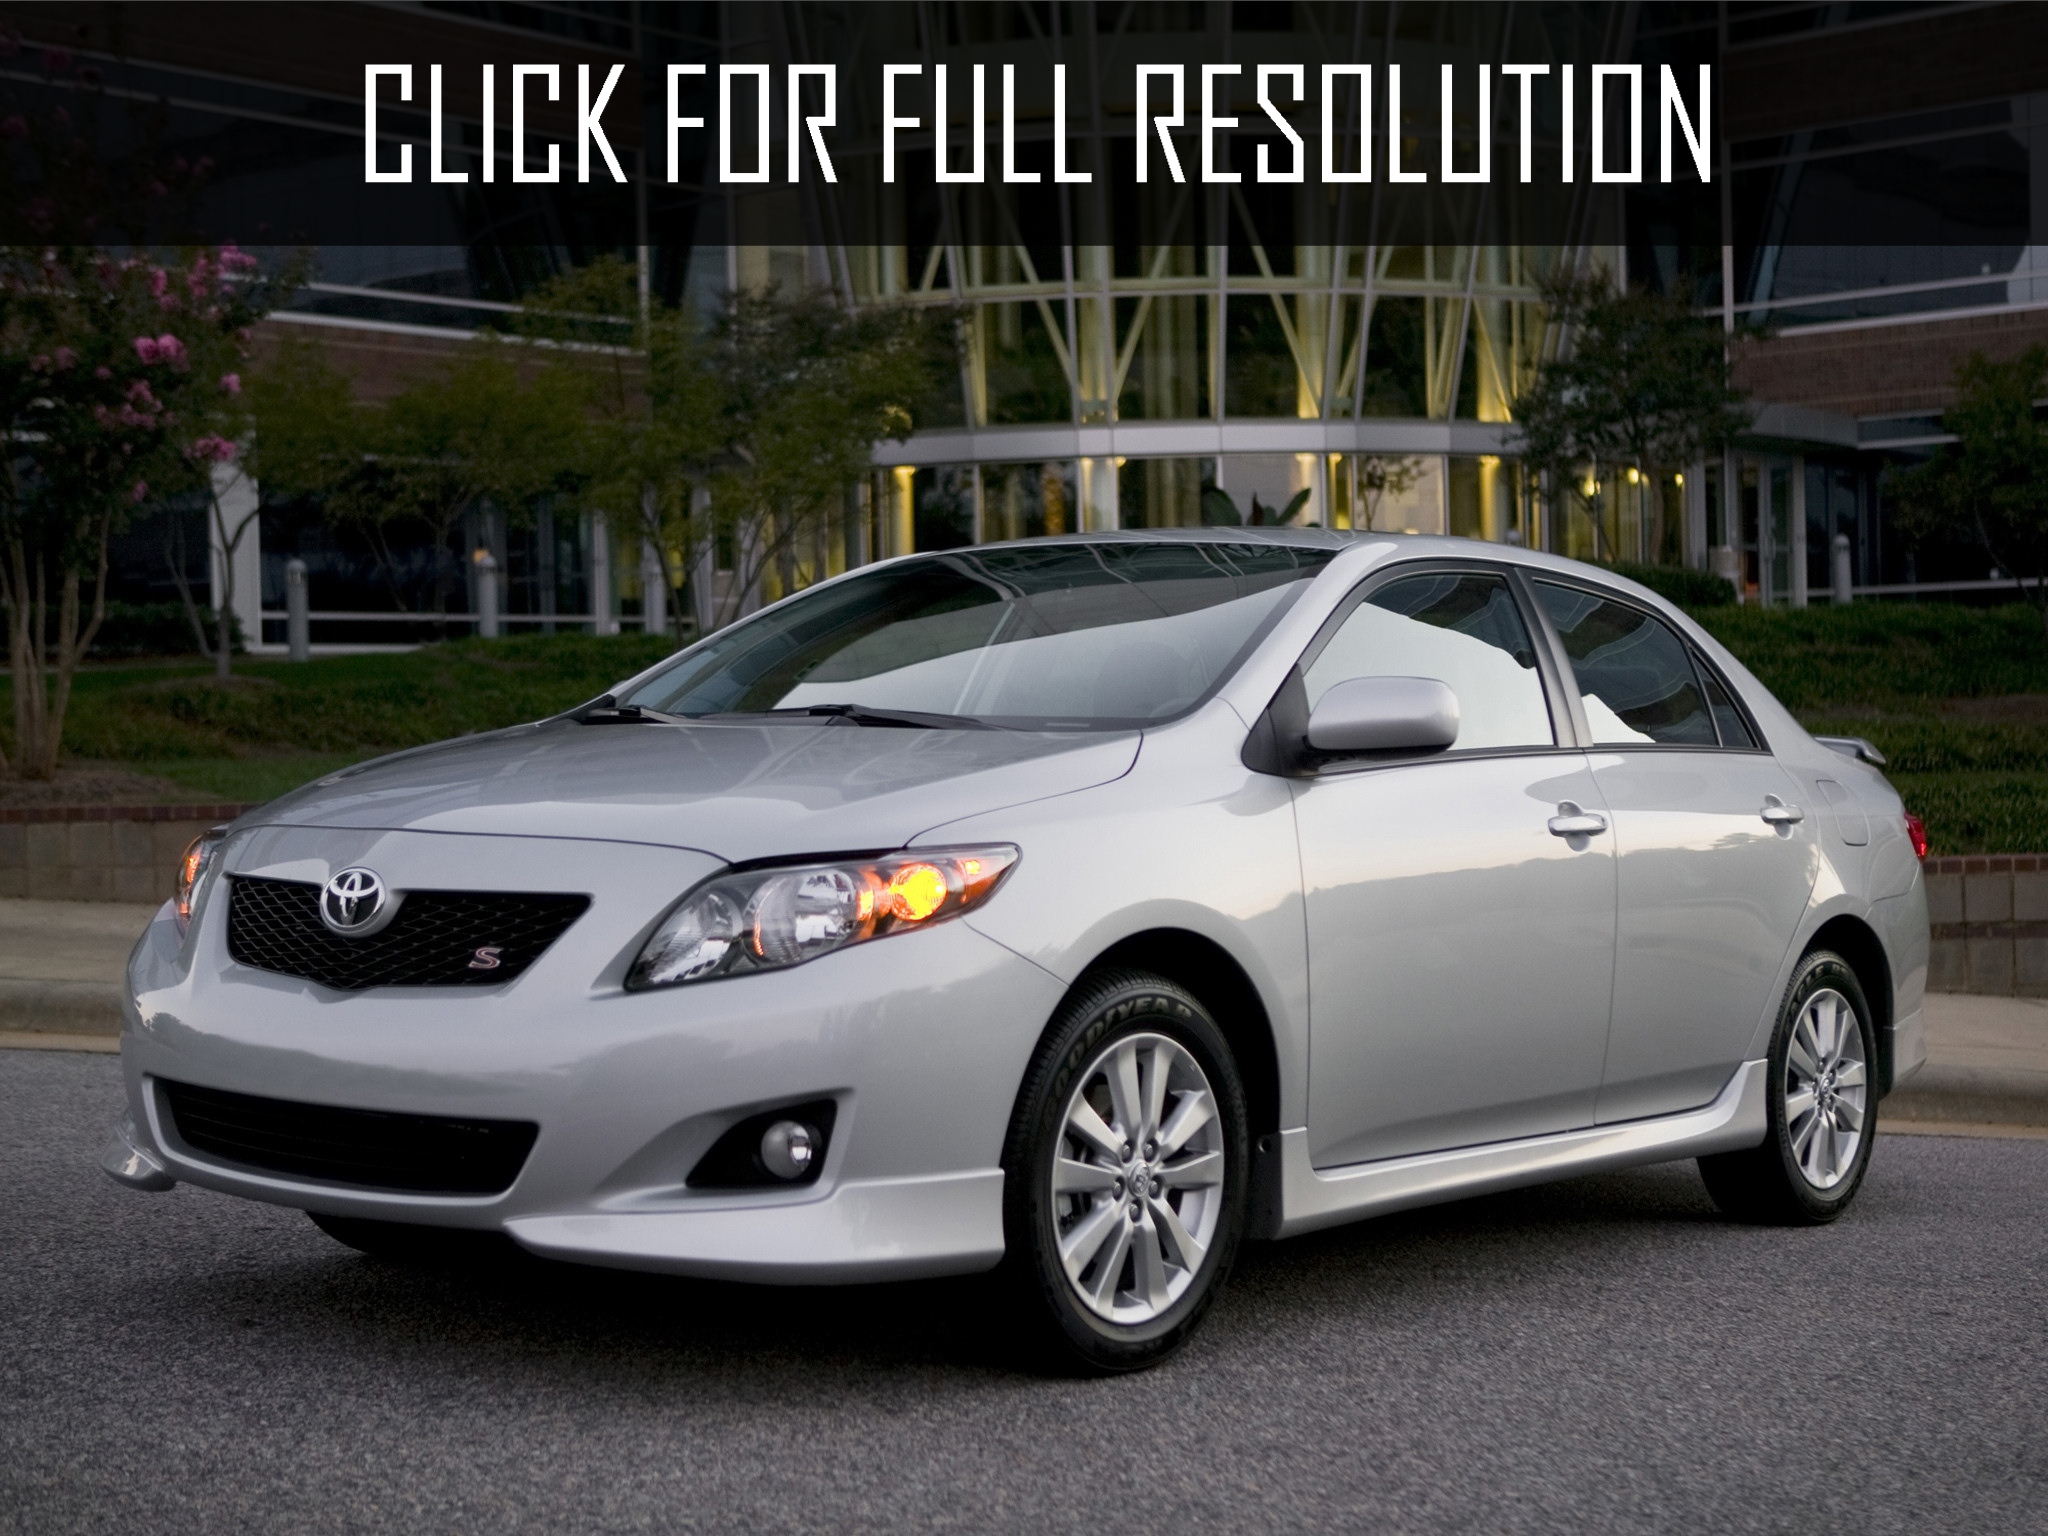 2008 Toyota Corolla S - news, reviews, msrp, ratings with amazing images